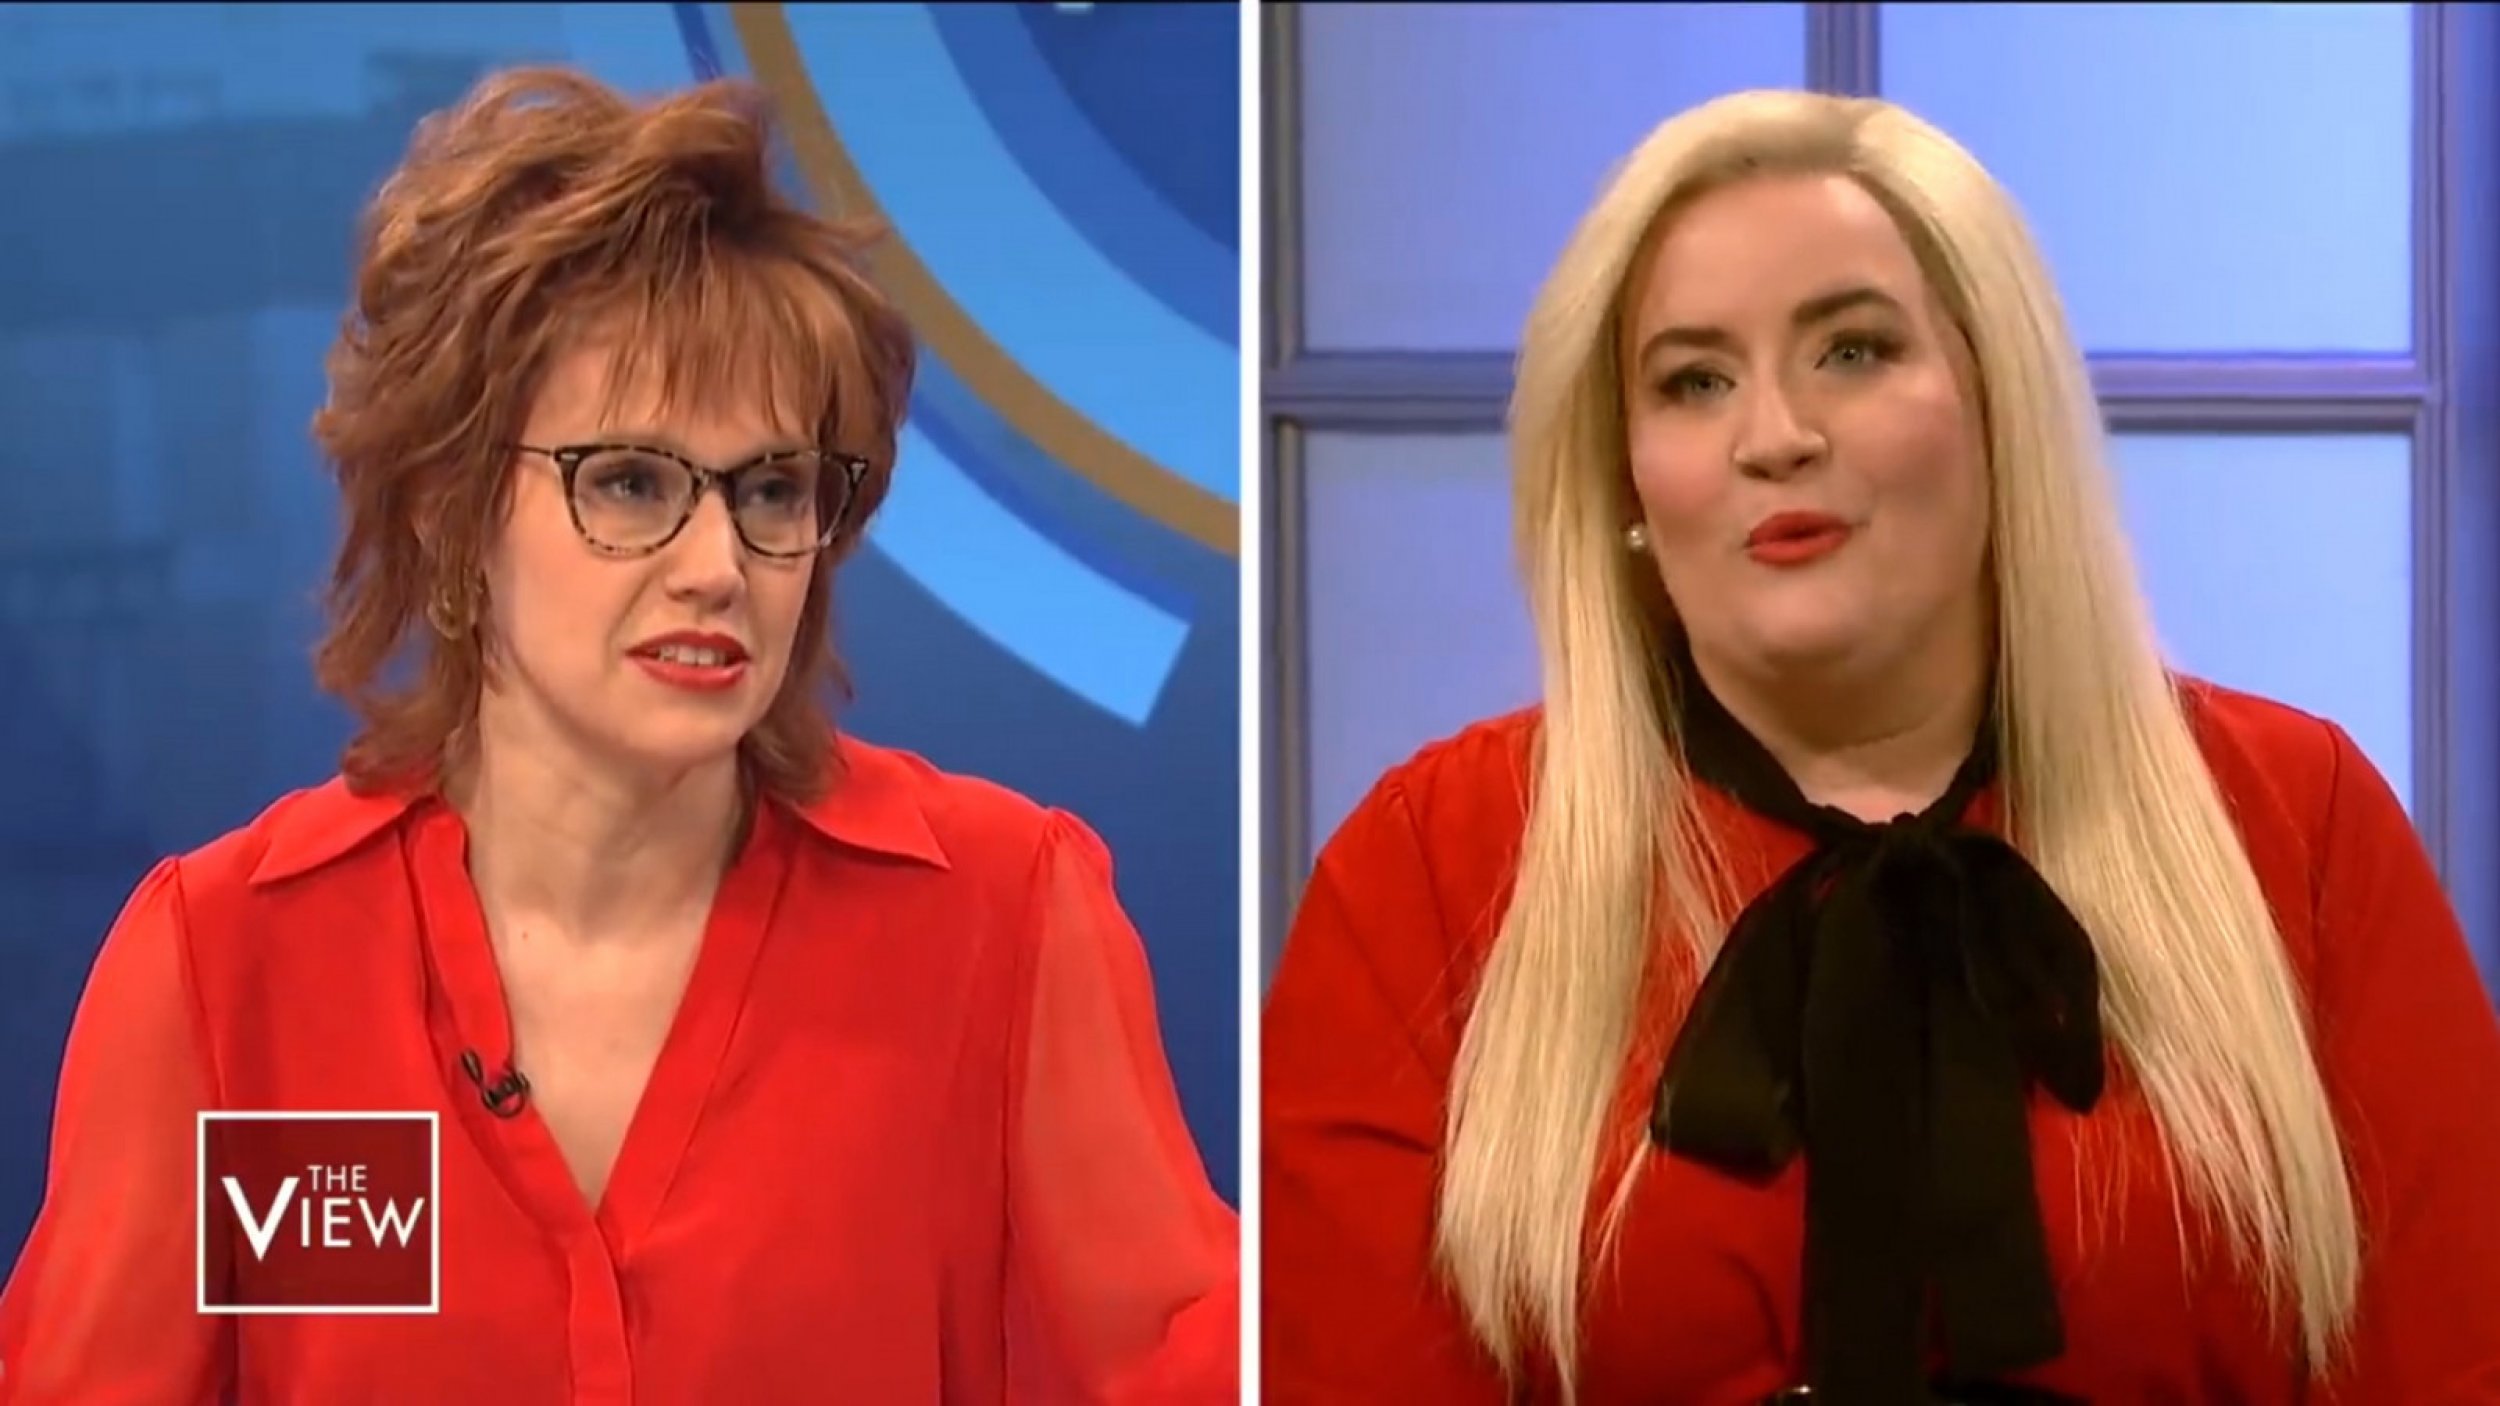 SNLs Parody Of The View Meghan McCain Celebrated The Talk Show